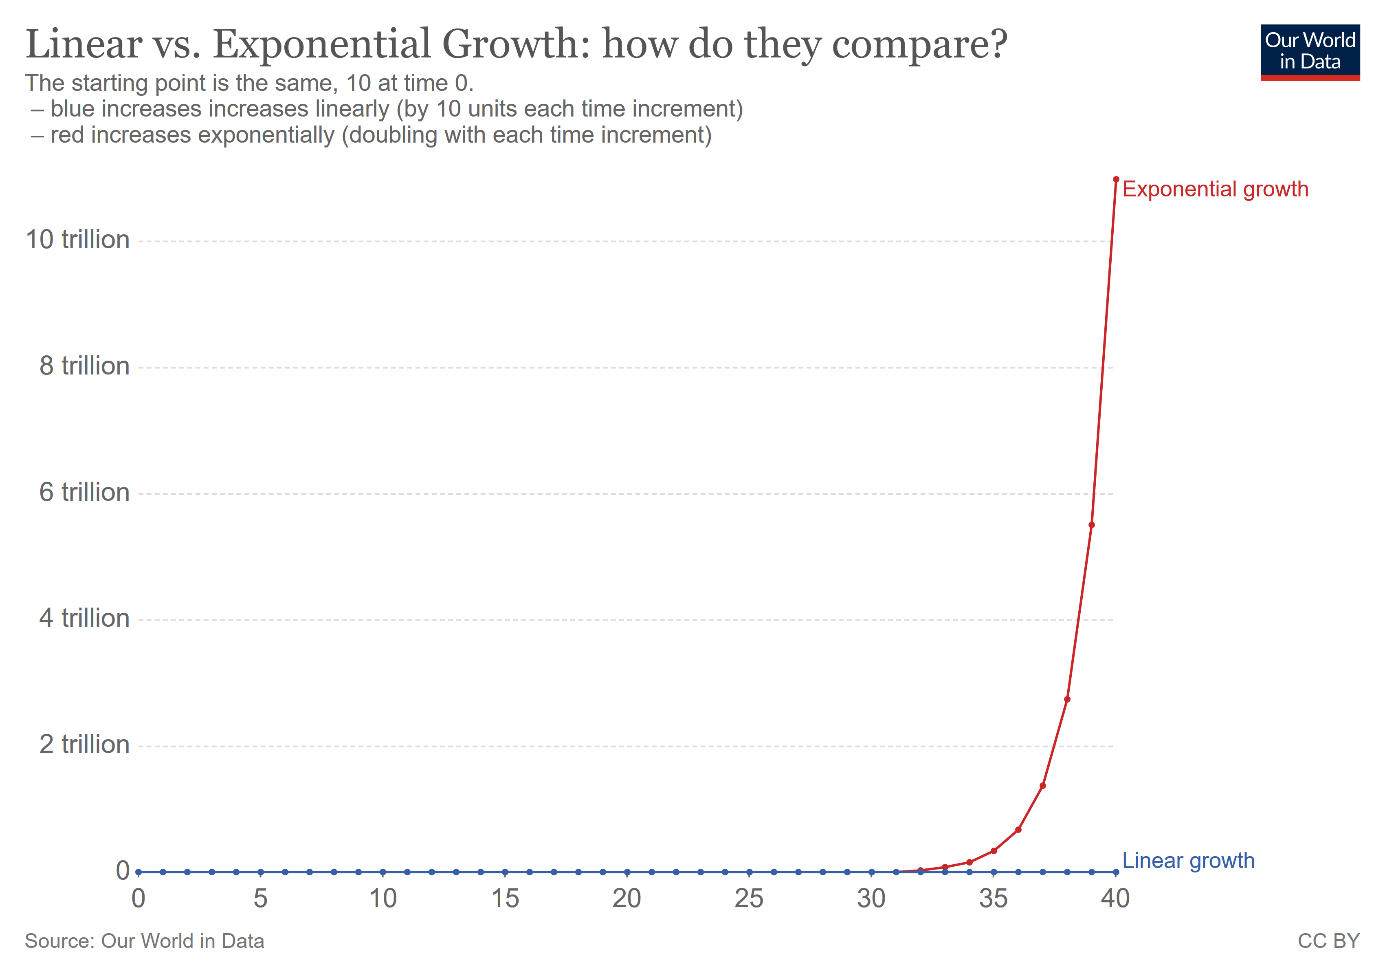 Linear growth (blue line) and exponential growth (red line)